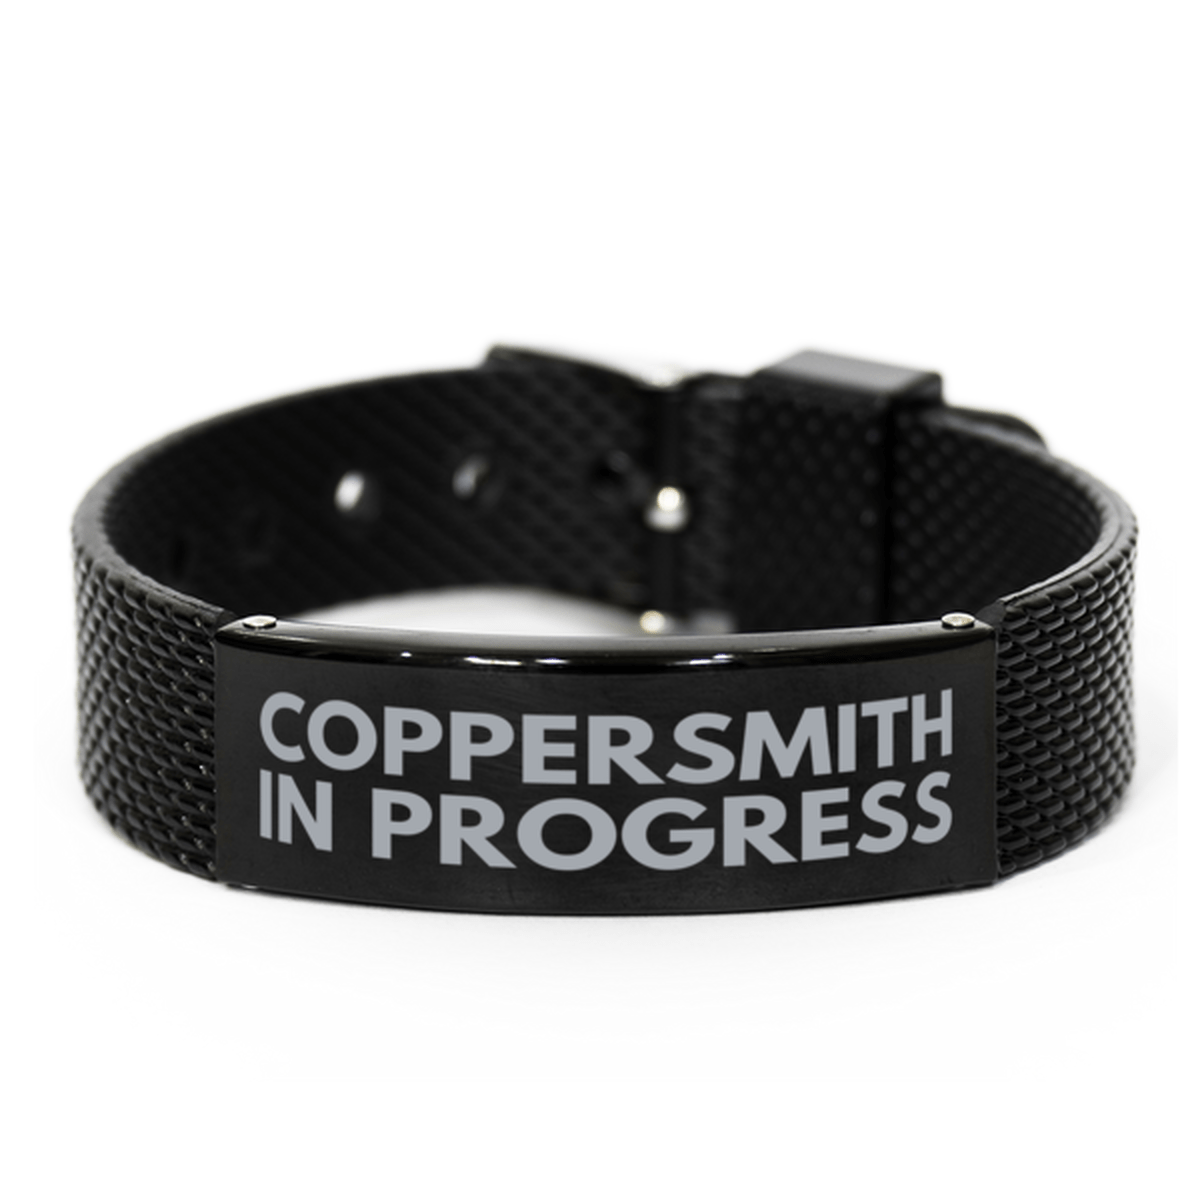 Inspirational Coppersmith Black Shark Mesh Bracelet, Coppersmith In Progress, Best Graduation Gifts for Students